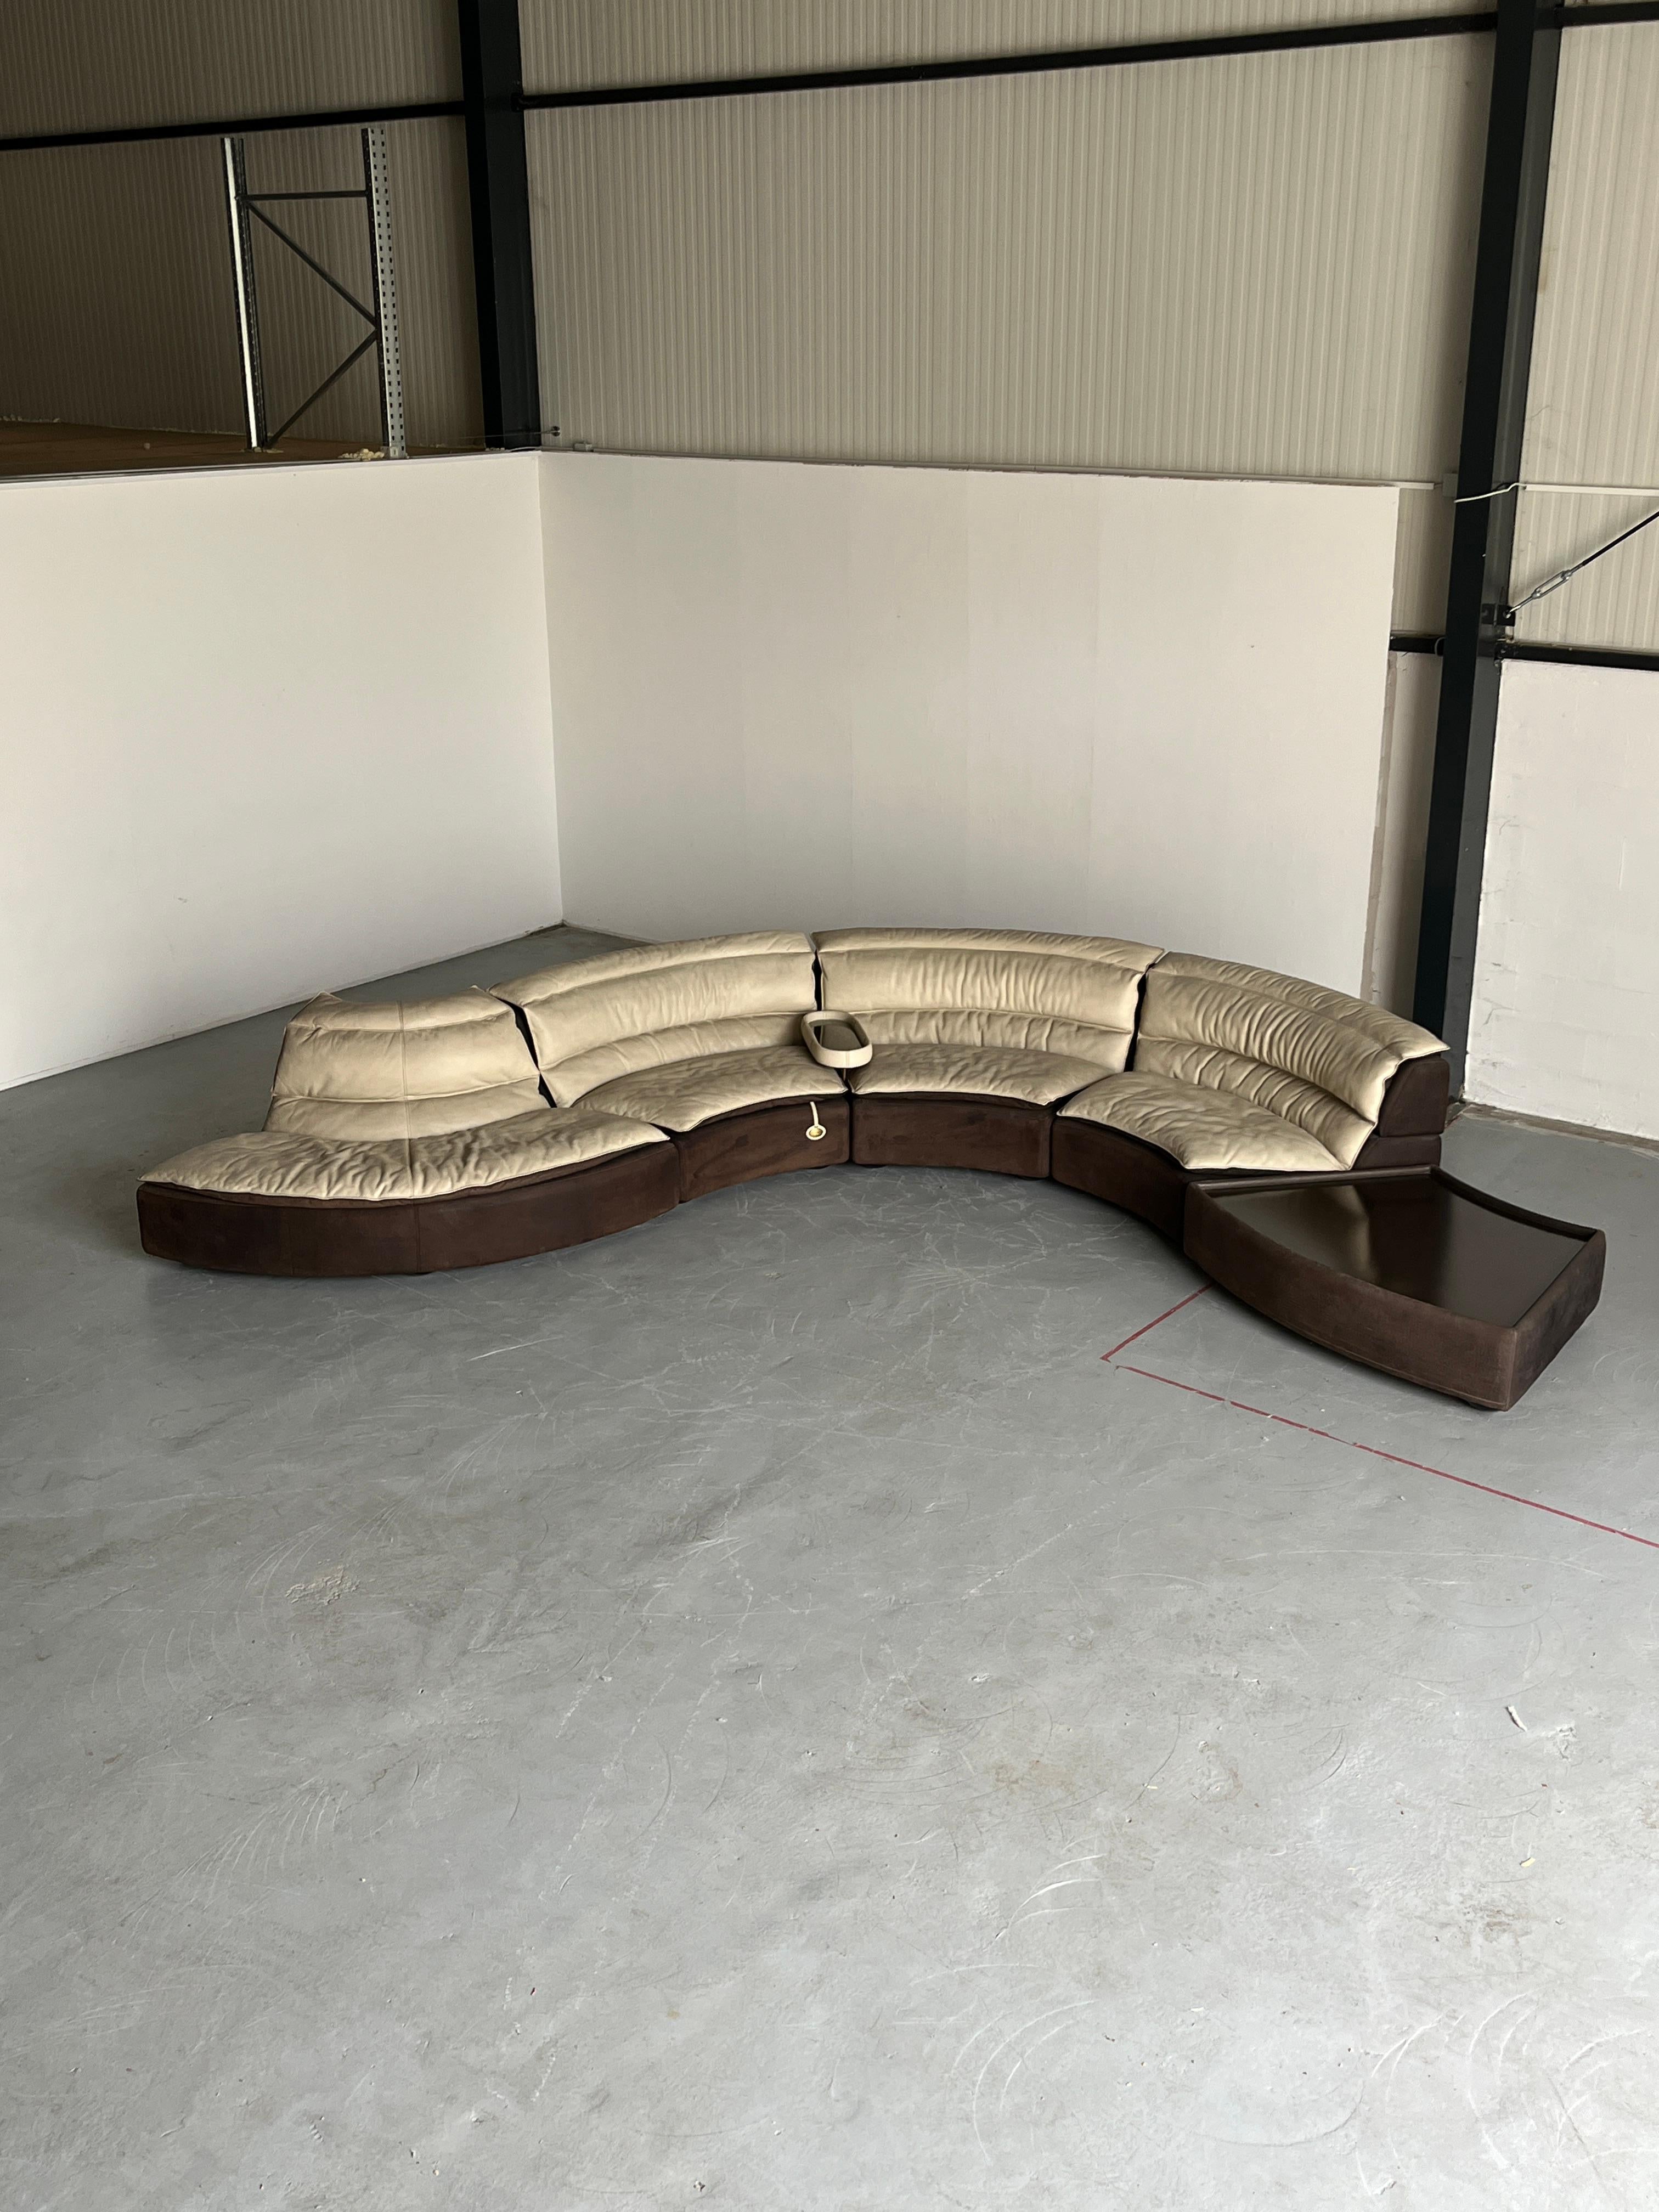 A stunning vintage serpentine modular sofa designed by Carlo Bartoli as a part of the 'Bogo' luxurious furniture series produced by Rossi di Albizzate.
The seating system consists of four seating elements and a table, which gives the opportunity to